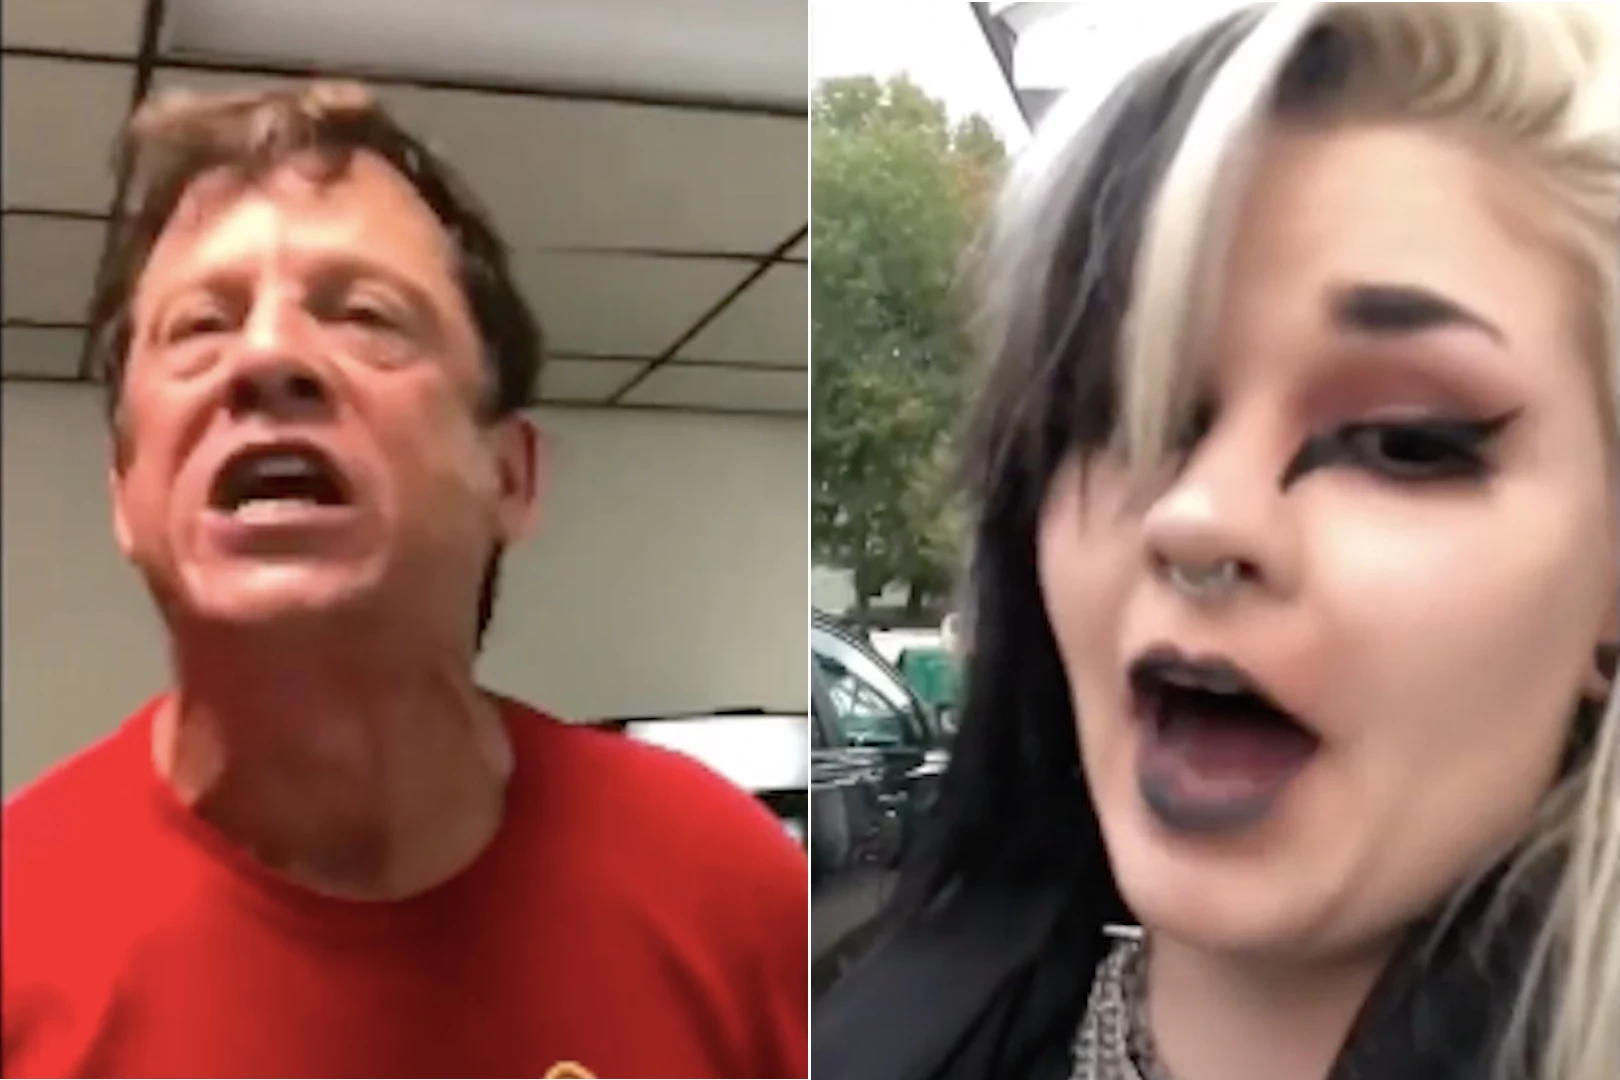 1620px x 1080px - Christian Restaurant Owner Goes Absolutely Psycho on Goth Girl